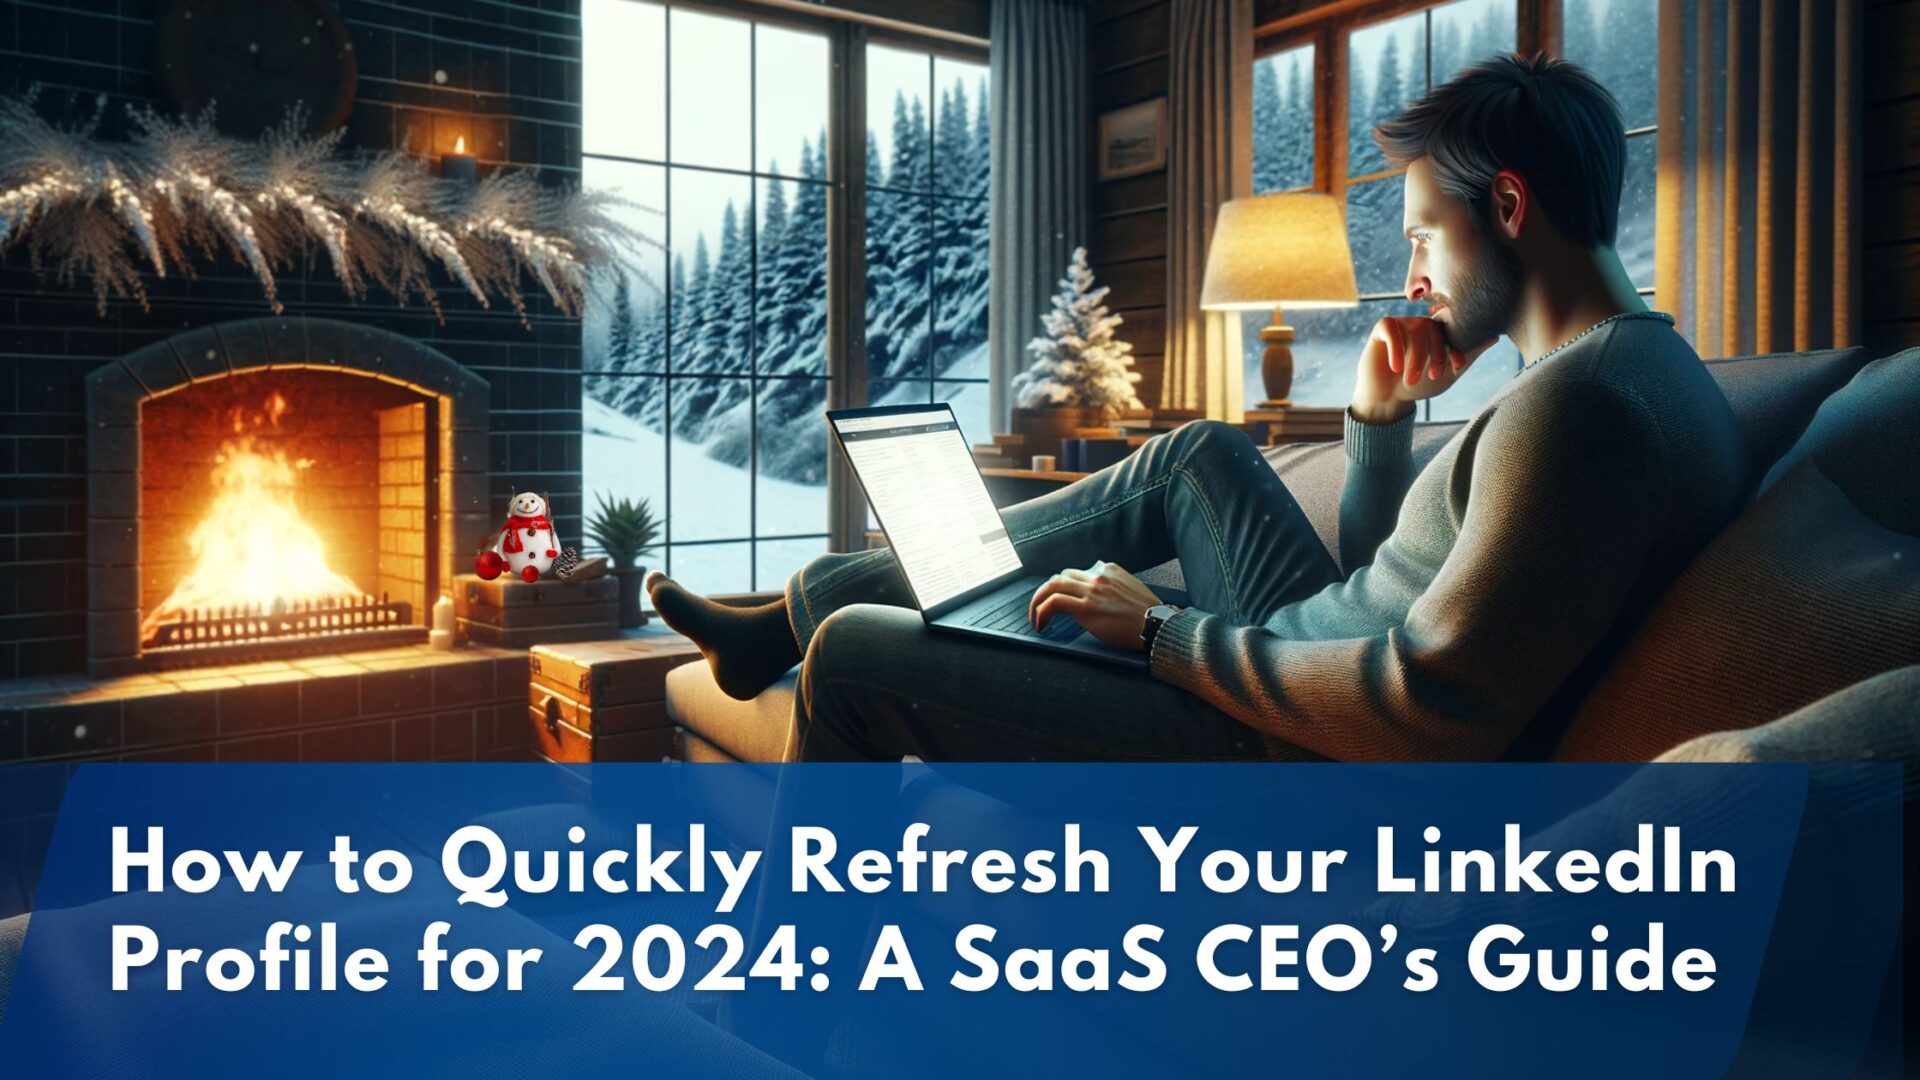 How Quickly Refresh Your LinkedIn Profile for 2024: A SaaS CEO's Guide cover image